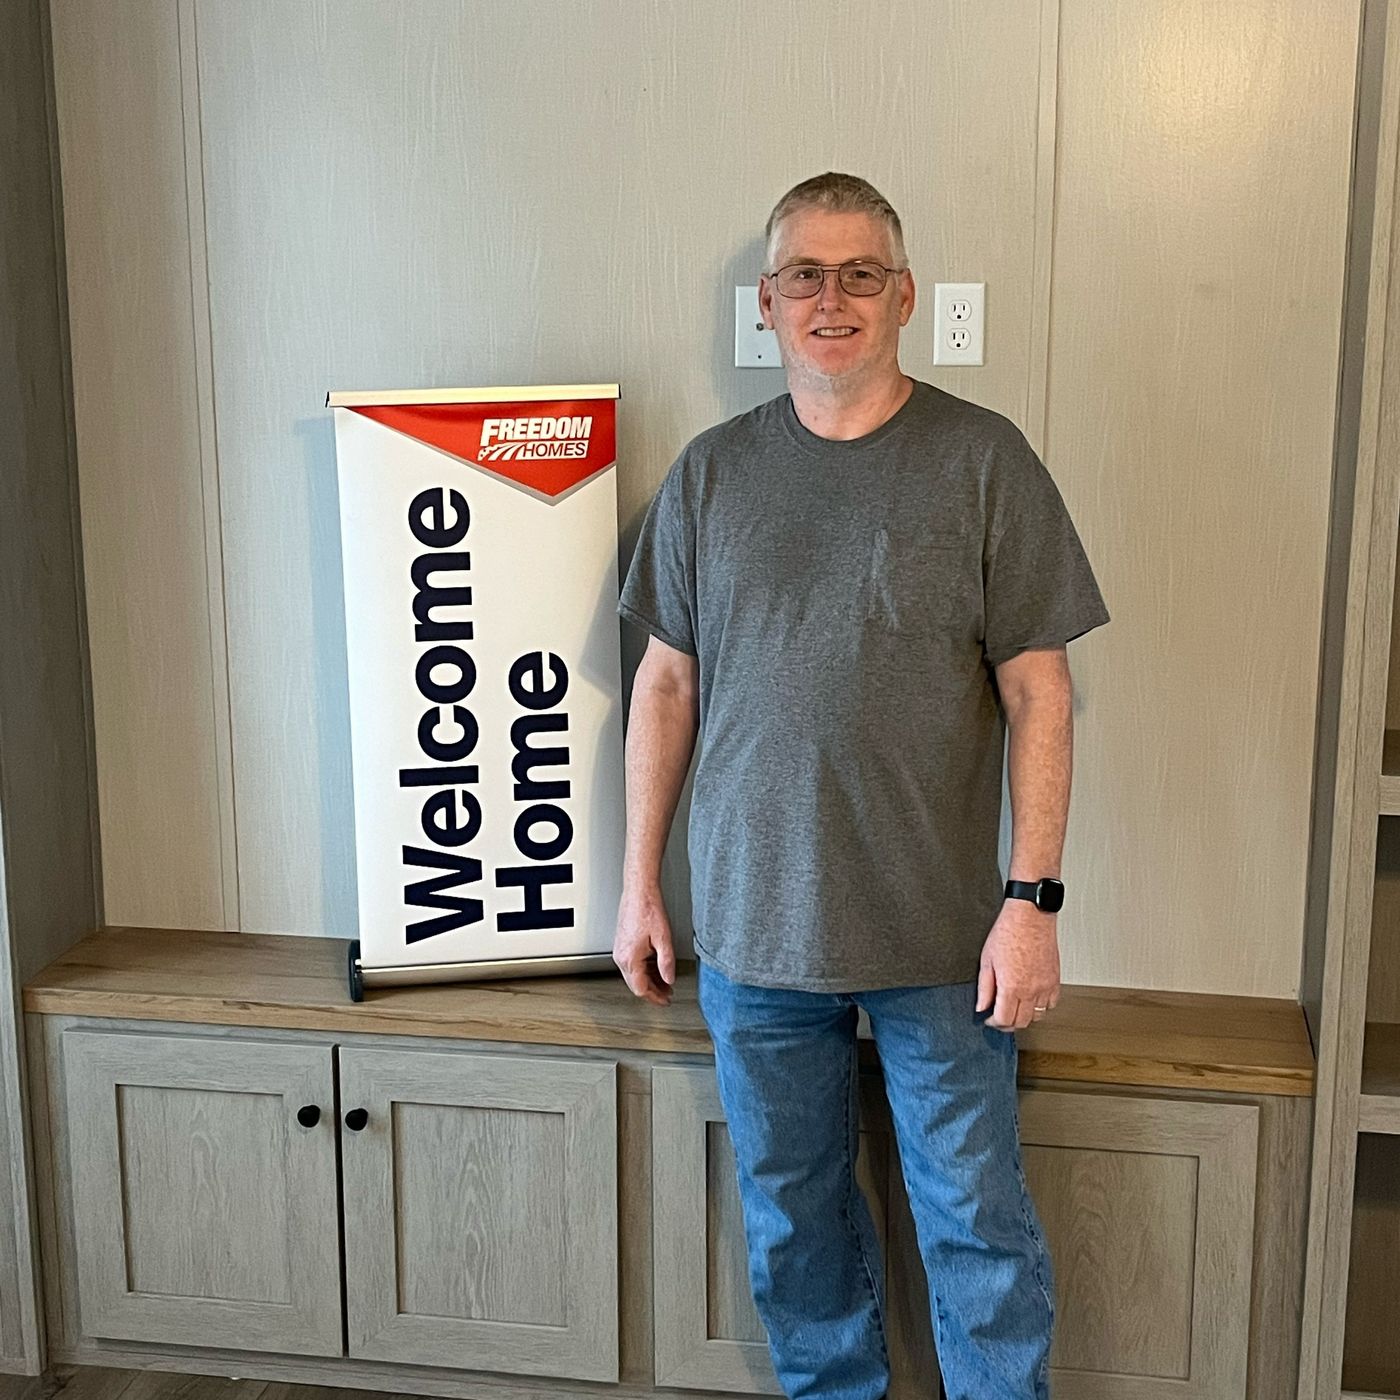 JAMES H. welcome home image